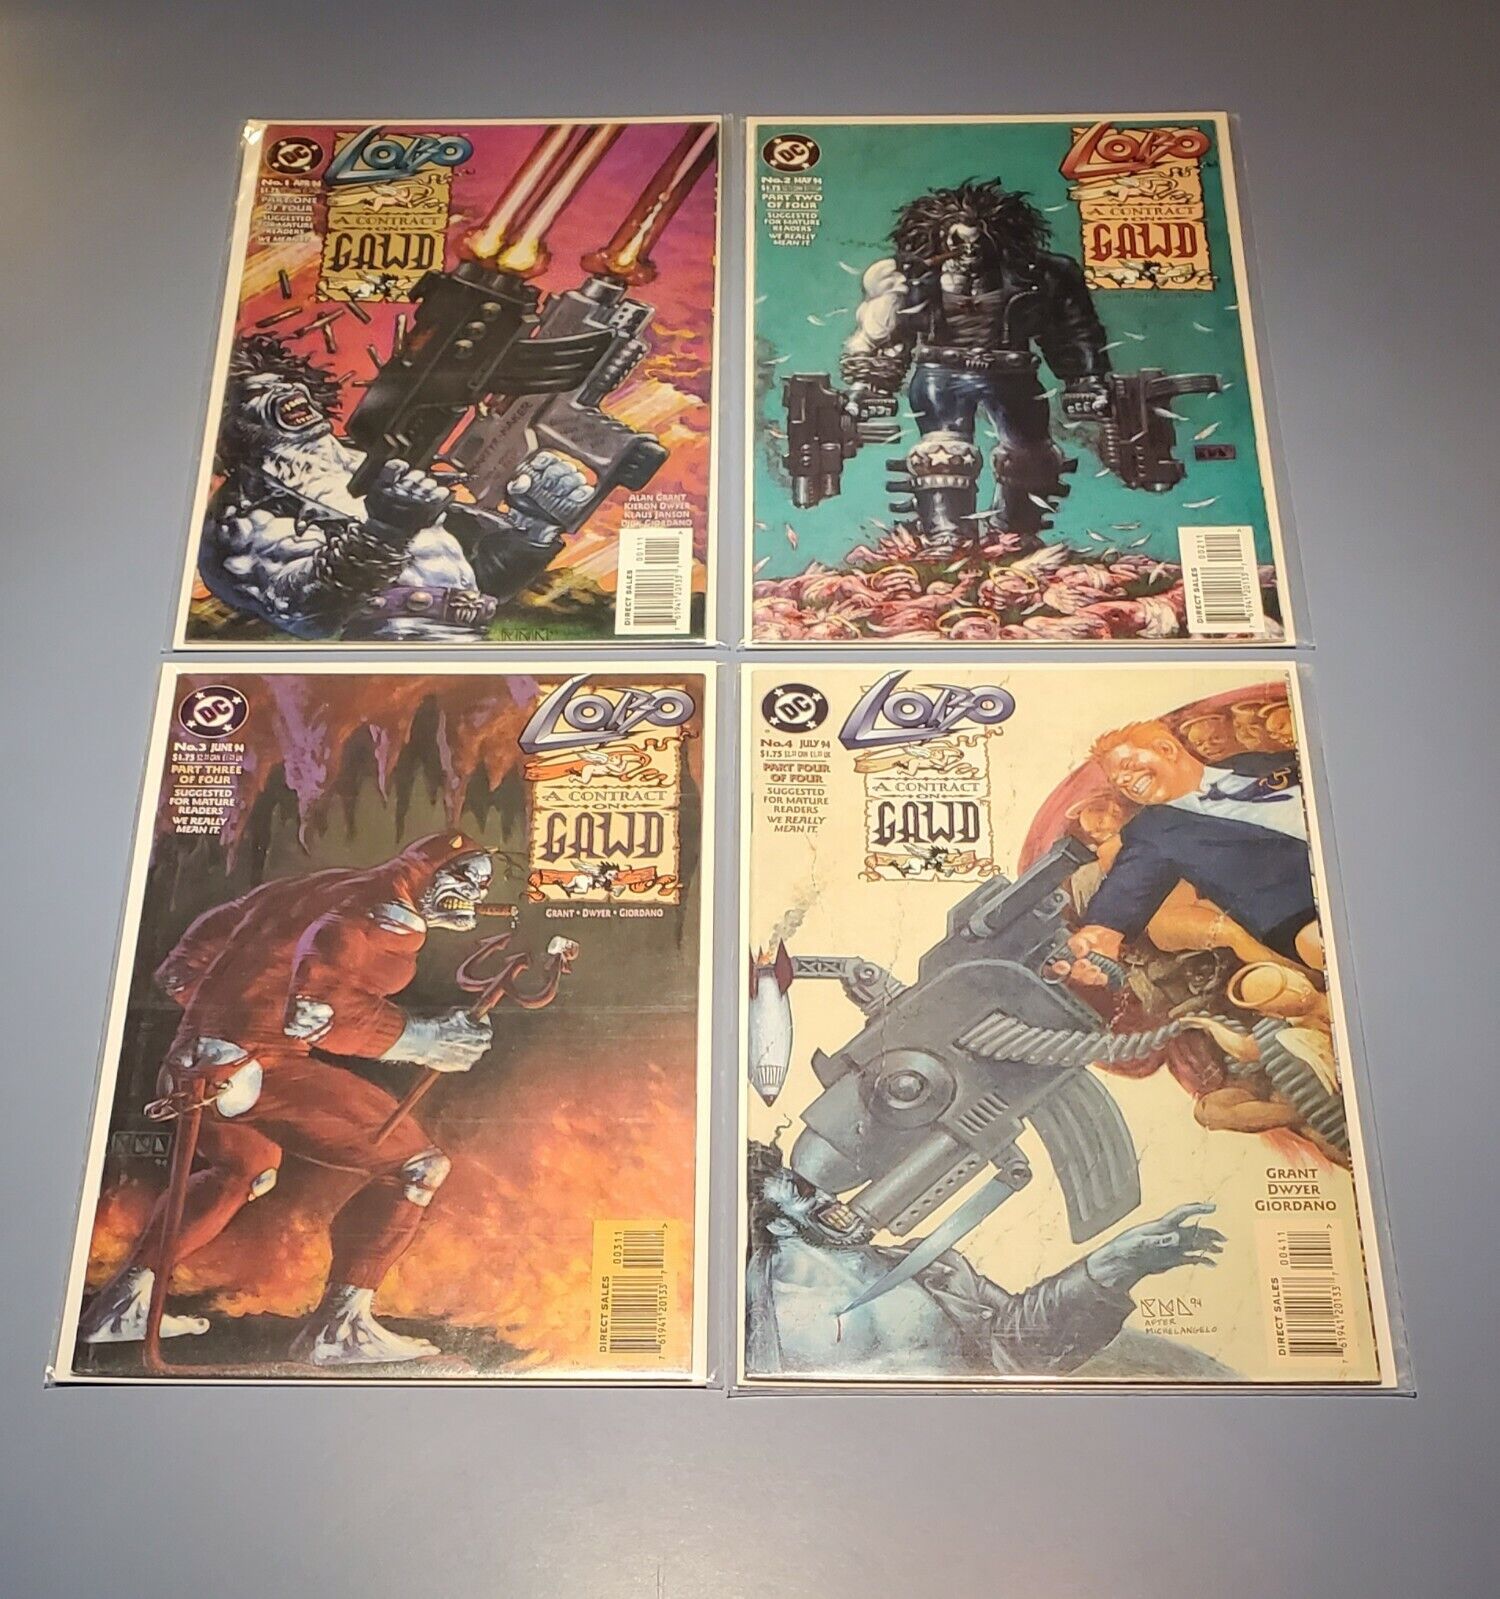 Lobo A Contract On Gawd Four Issue Series #1-4 DC Comic Books *HIGH GRADE* 1994 